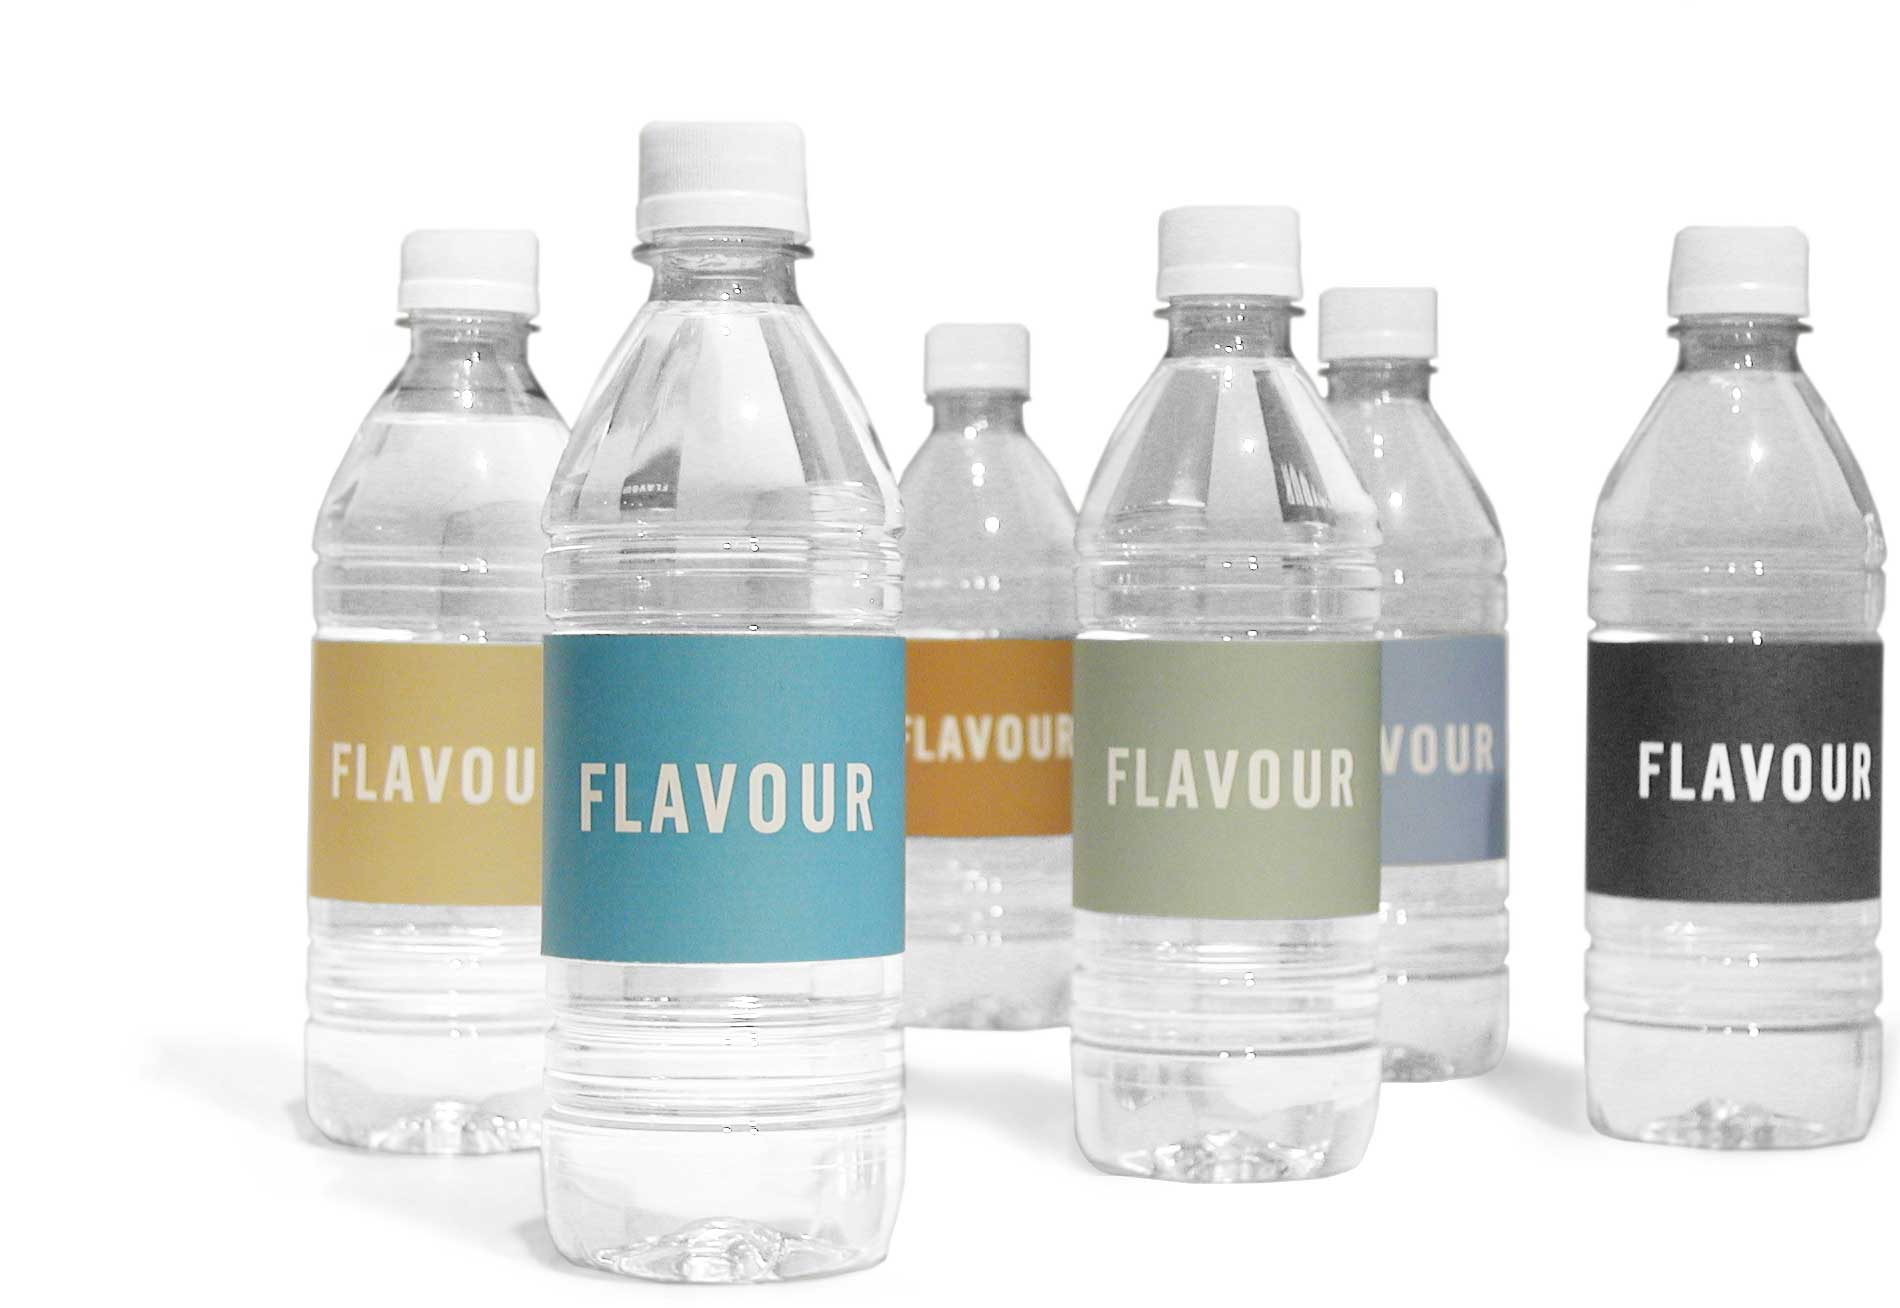 Flavour brand identity recognized by The One Show